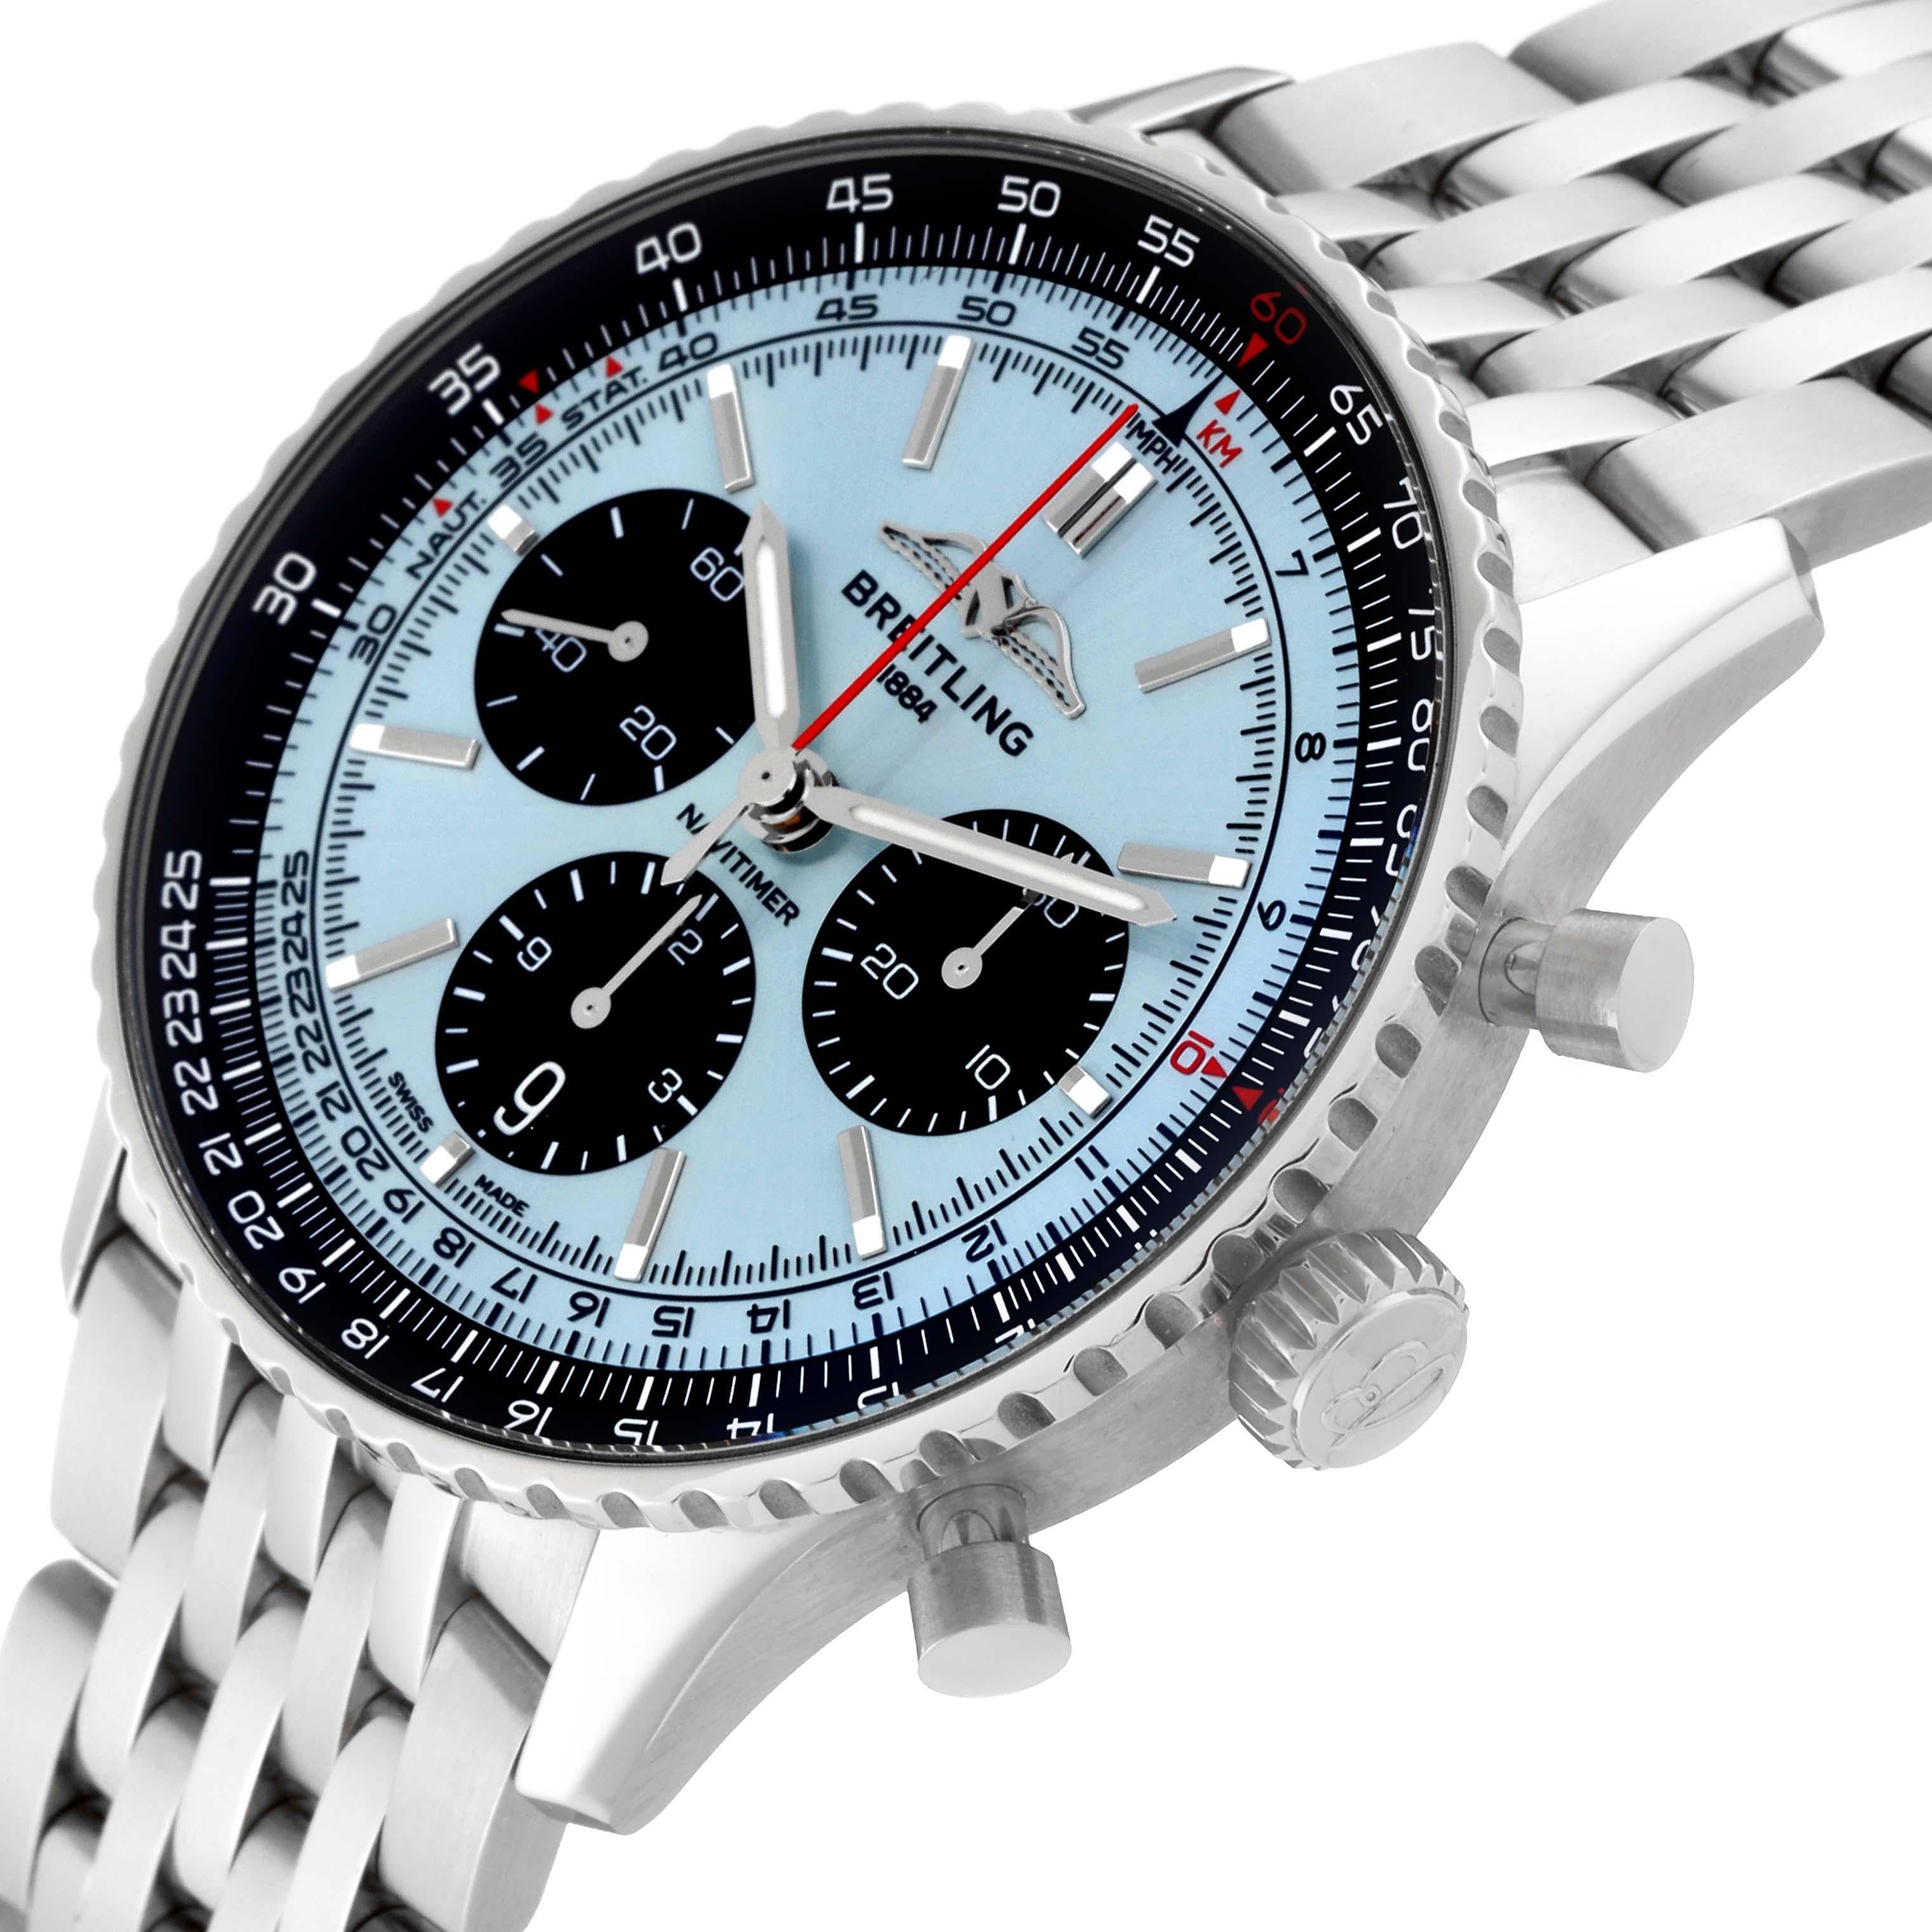 Breitling Navitimer B01 Blue Dial Steel Mens Watch AB0138 Box Card In Excellent Condition For Sale In Atlanta, GA